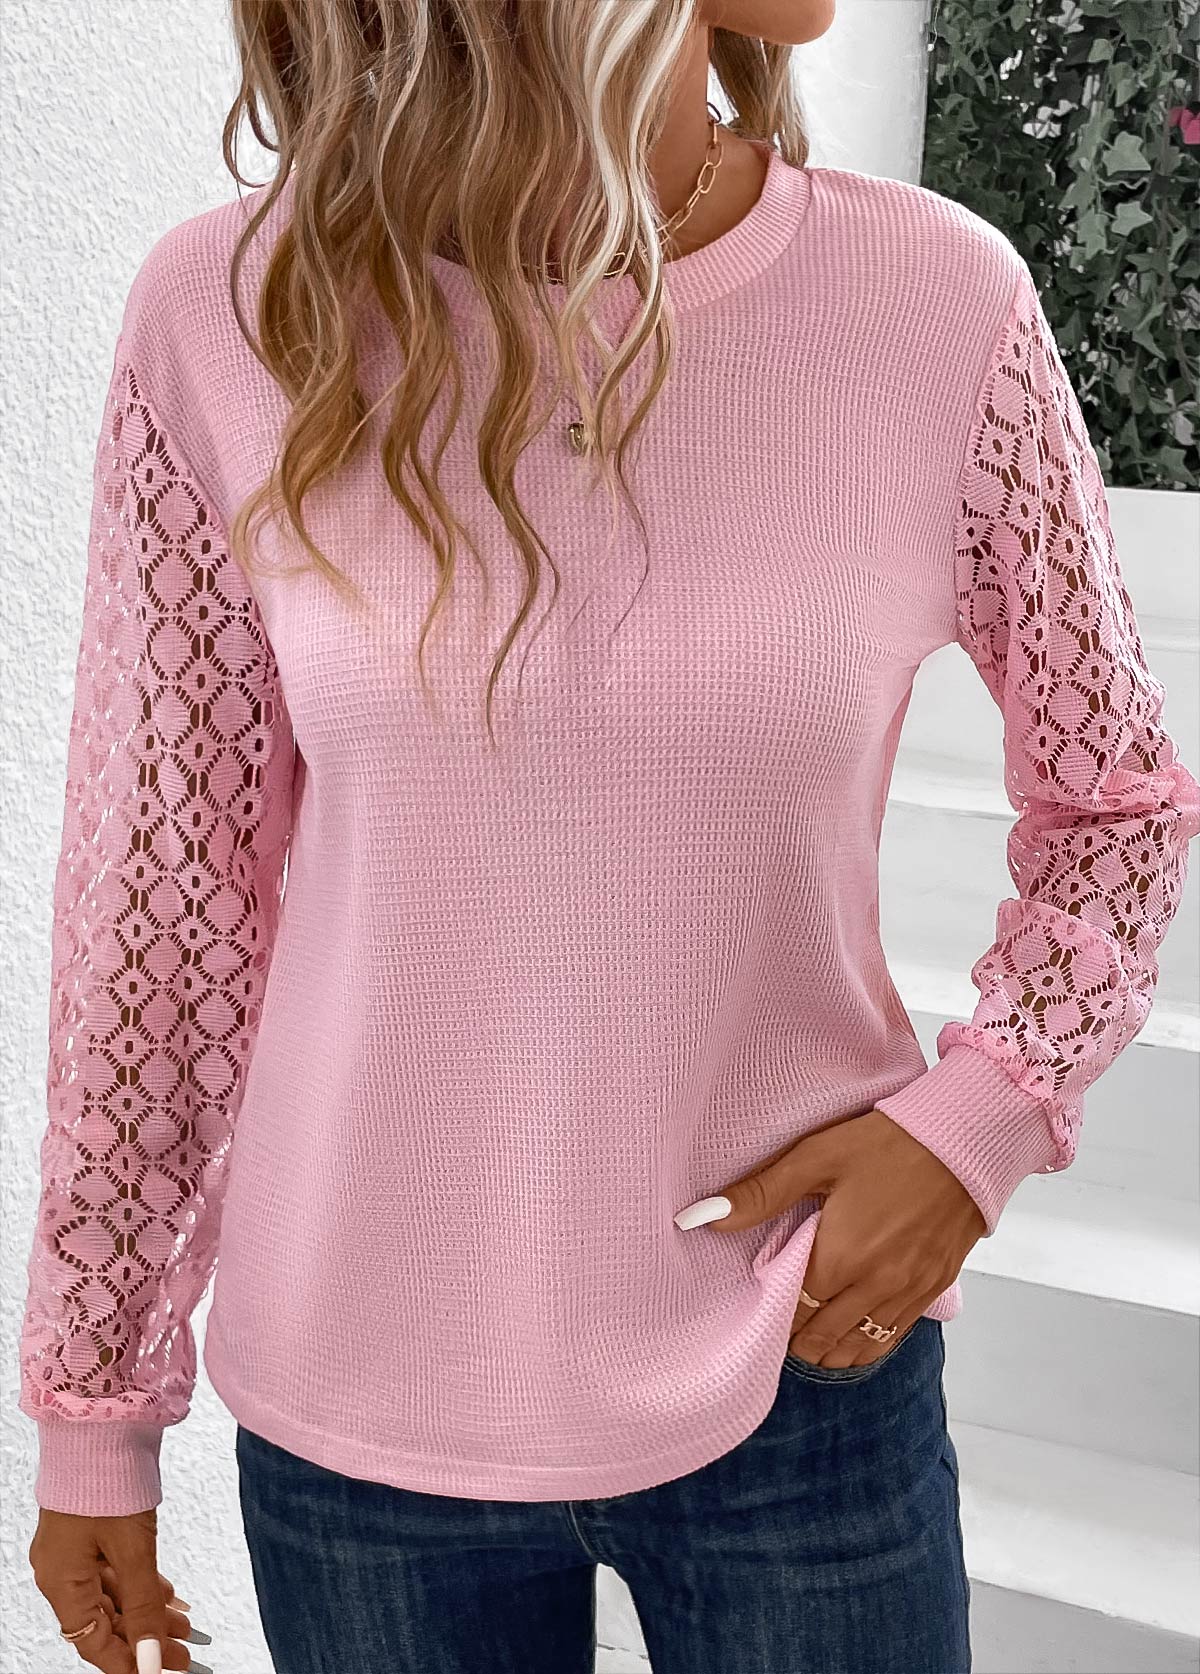 Lace Round Neck Long Sleeve Pink T Shirt